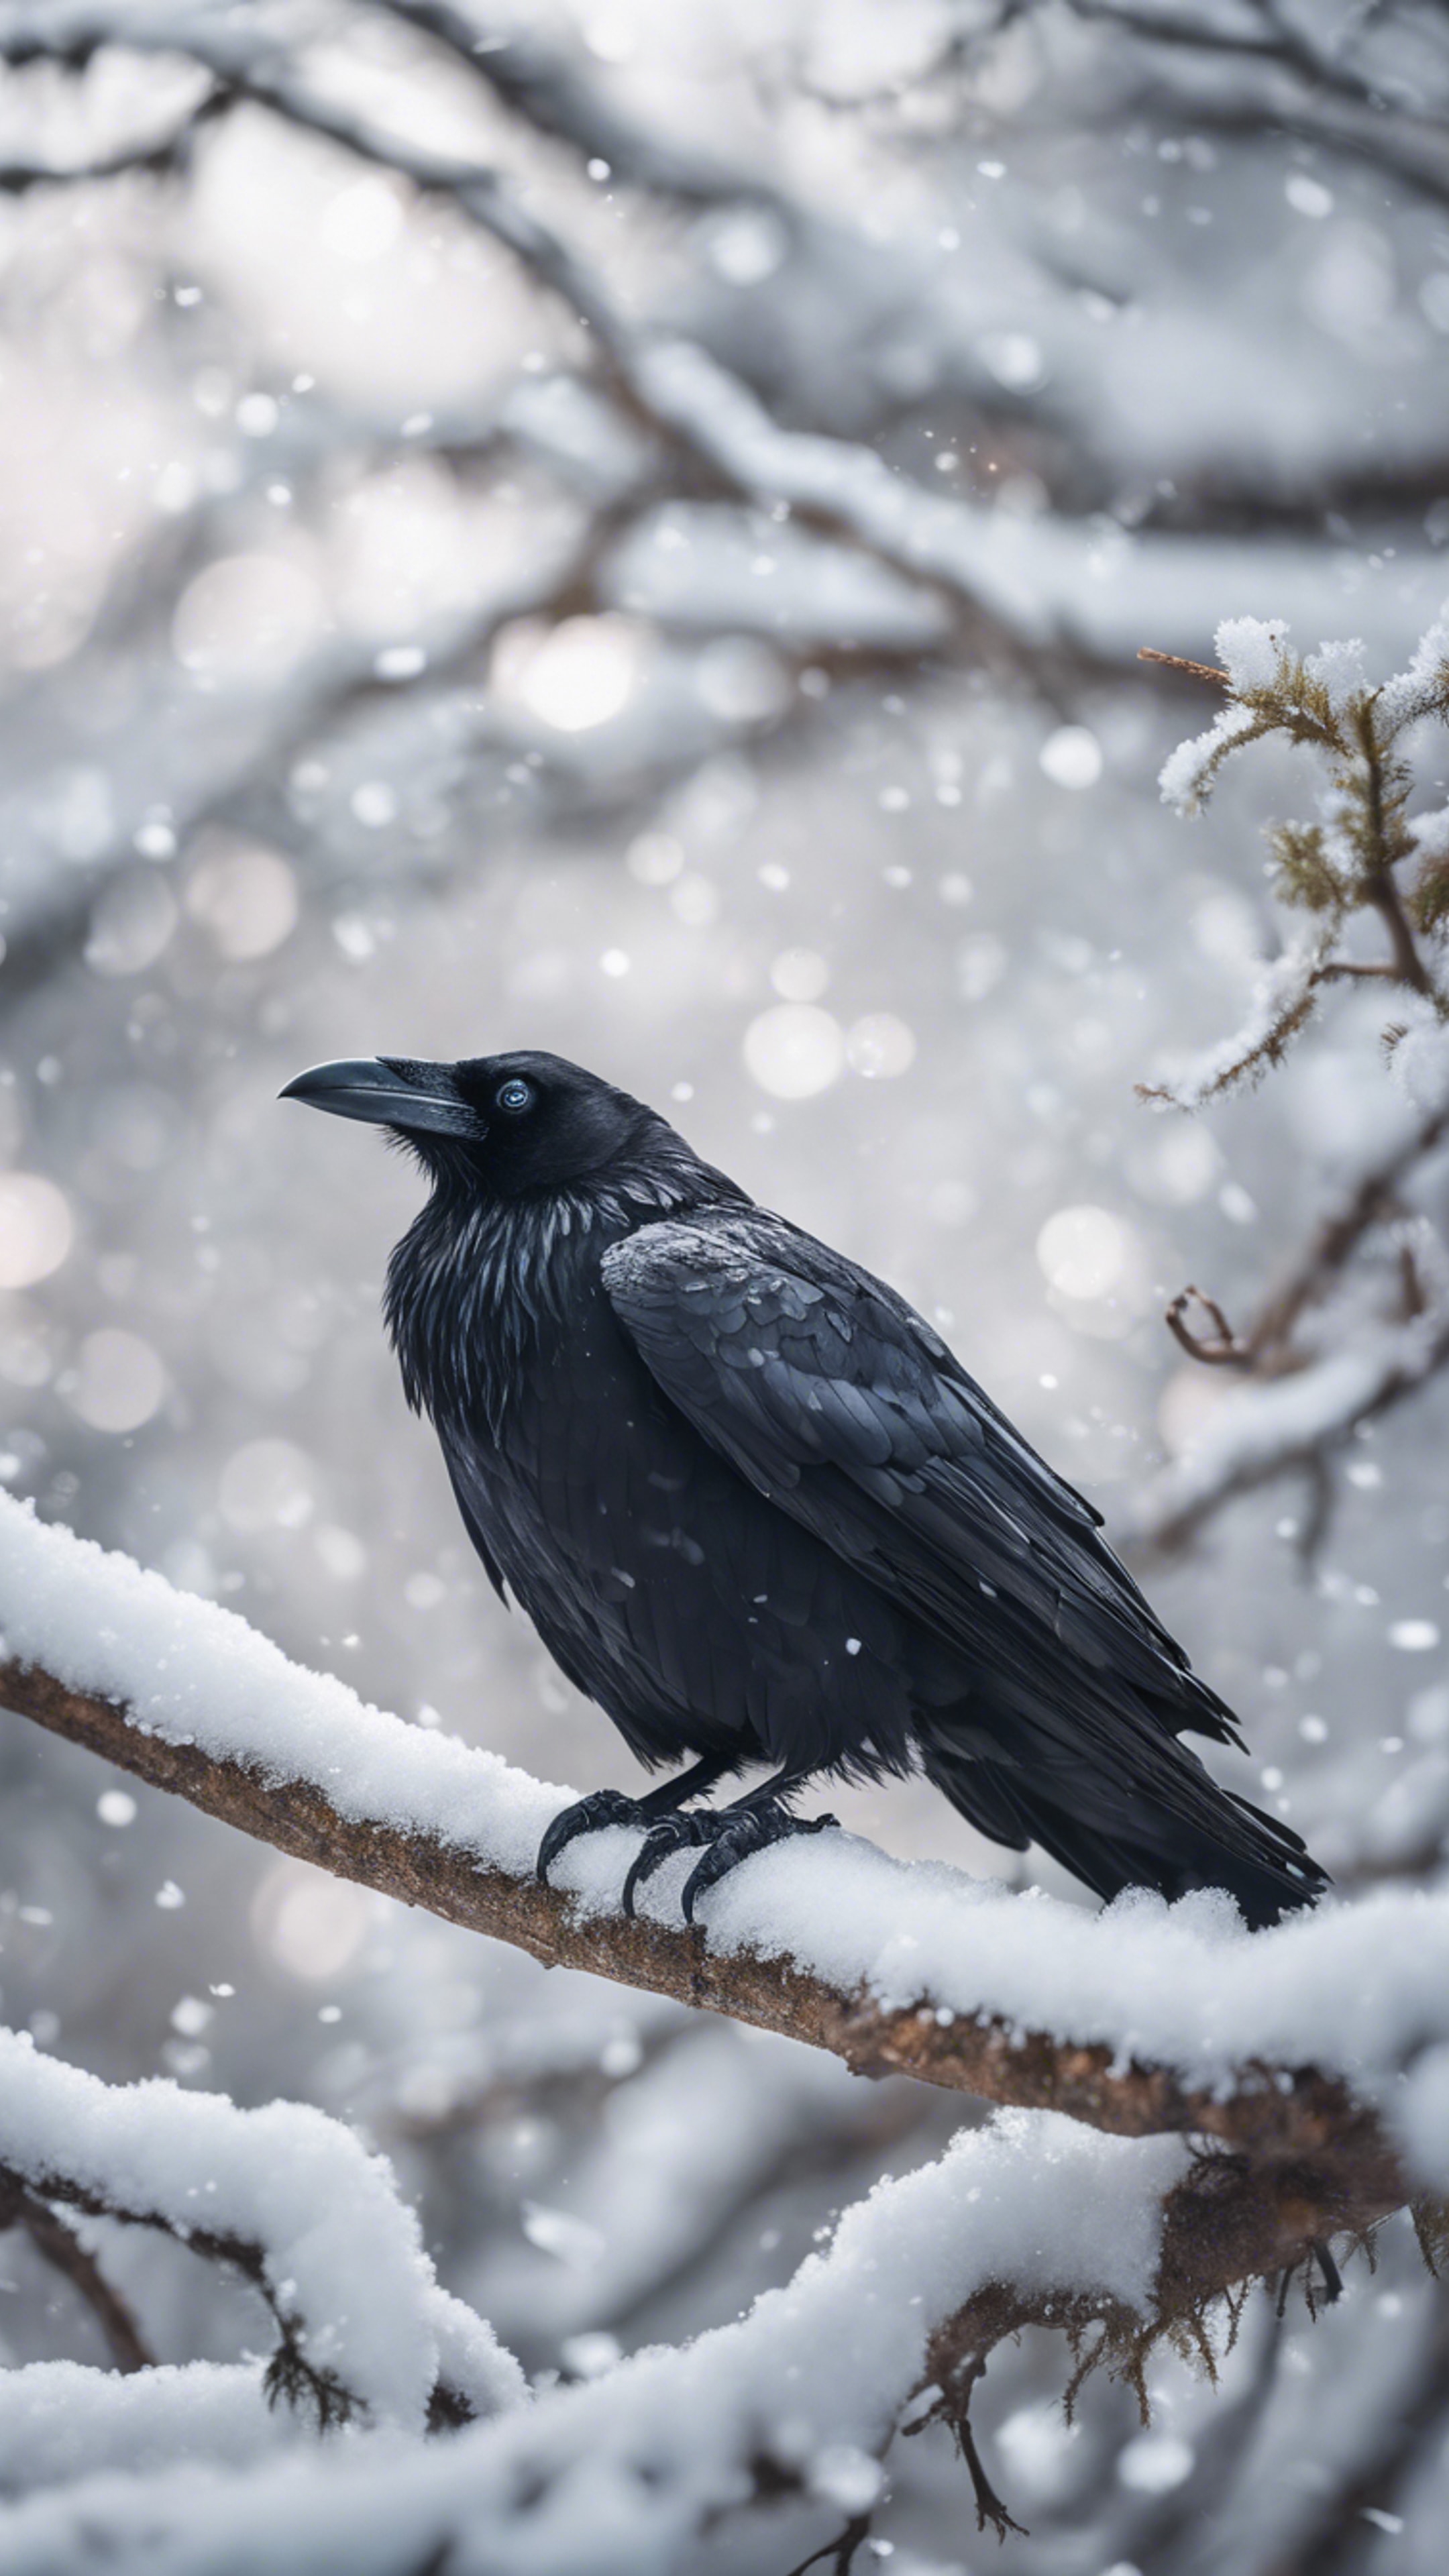 A mysterious black raven perched on a stark, white snow covered branch. Tapeta[9249f7444d554026acd7]